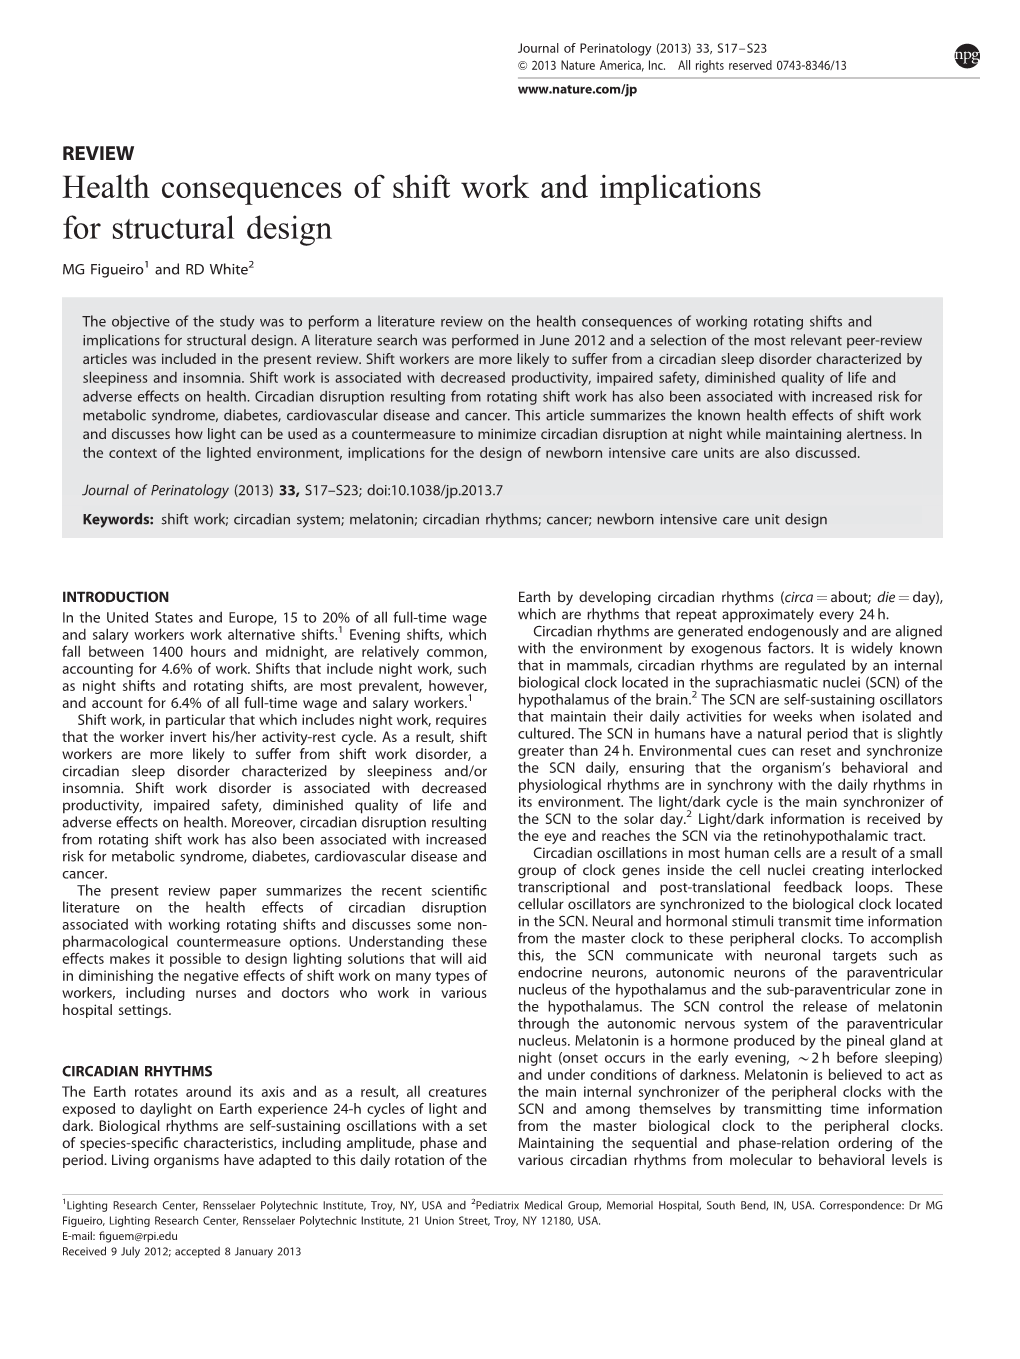 Health Consequences of Shift Work and Implications for Structural Design